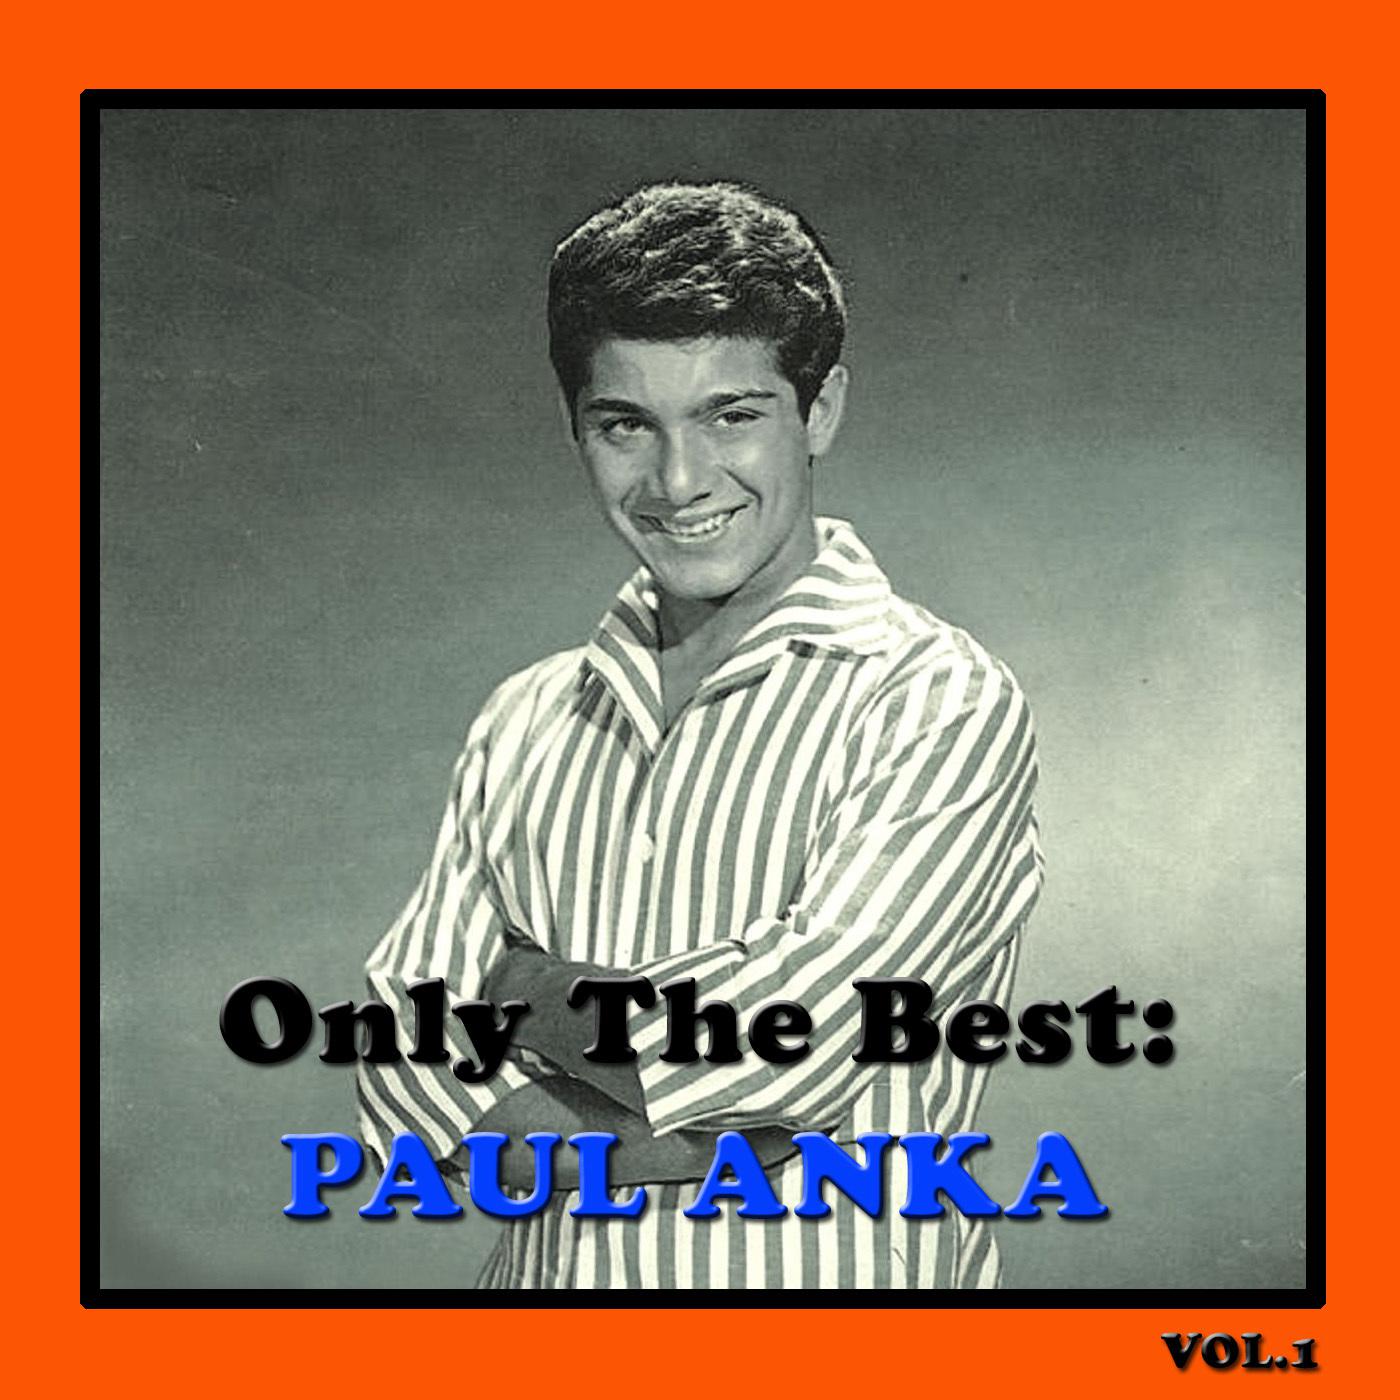 Only The Best: Paul Anka, Vol. 1